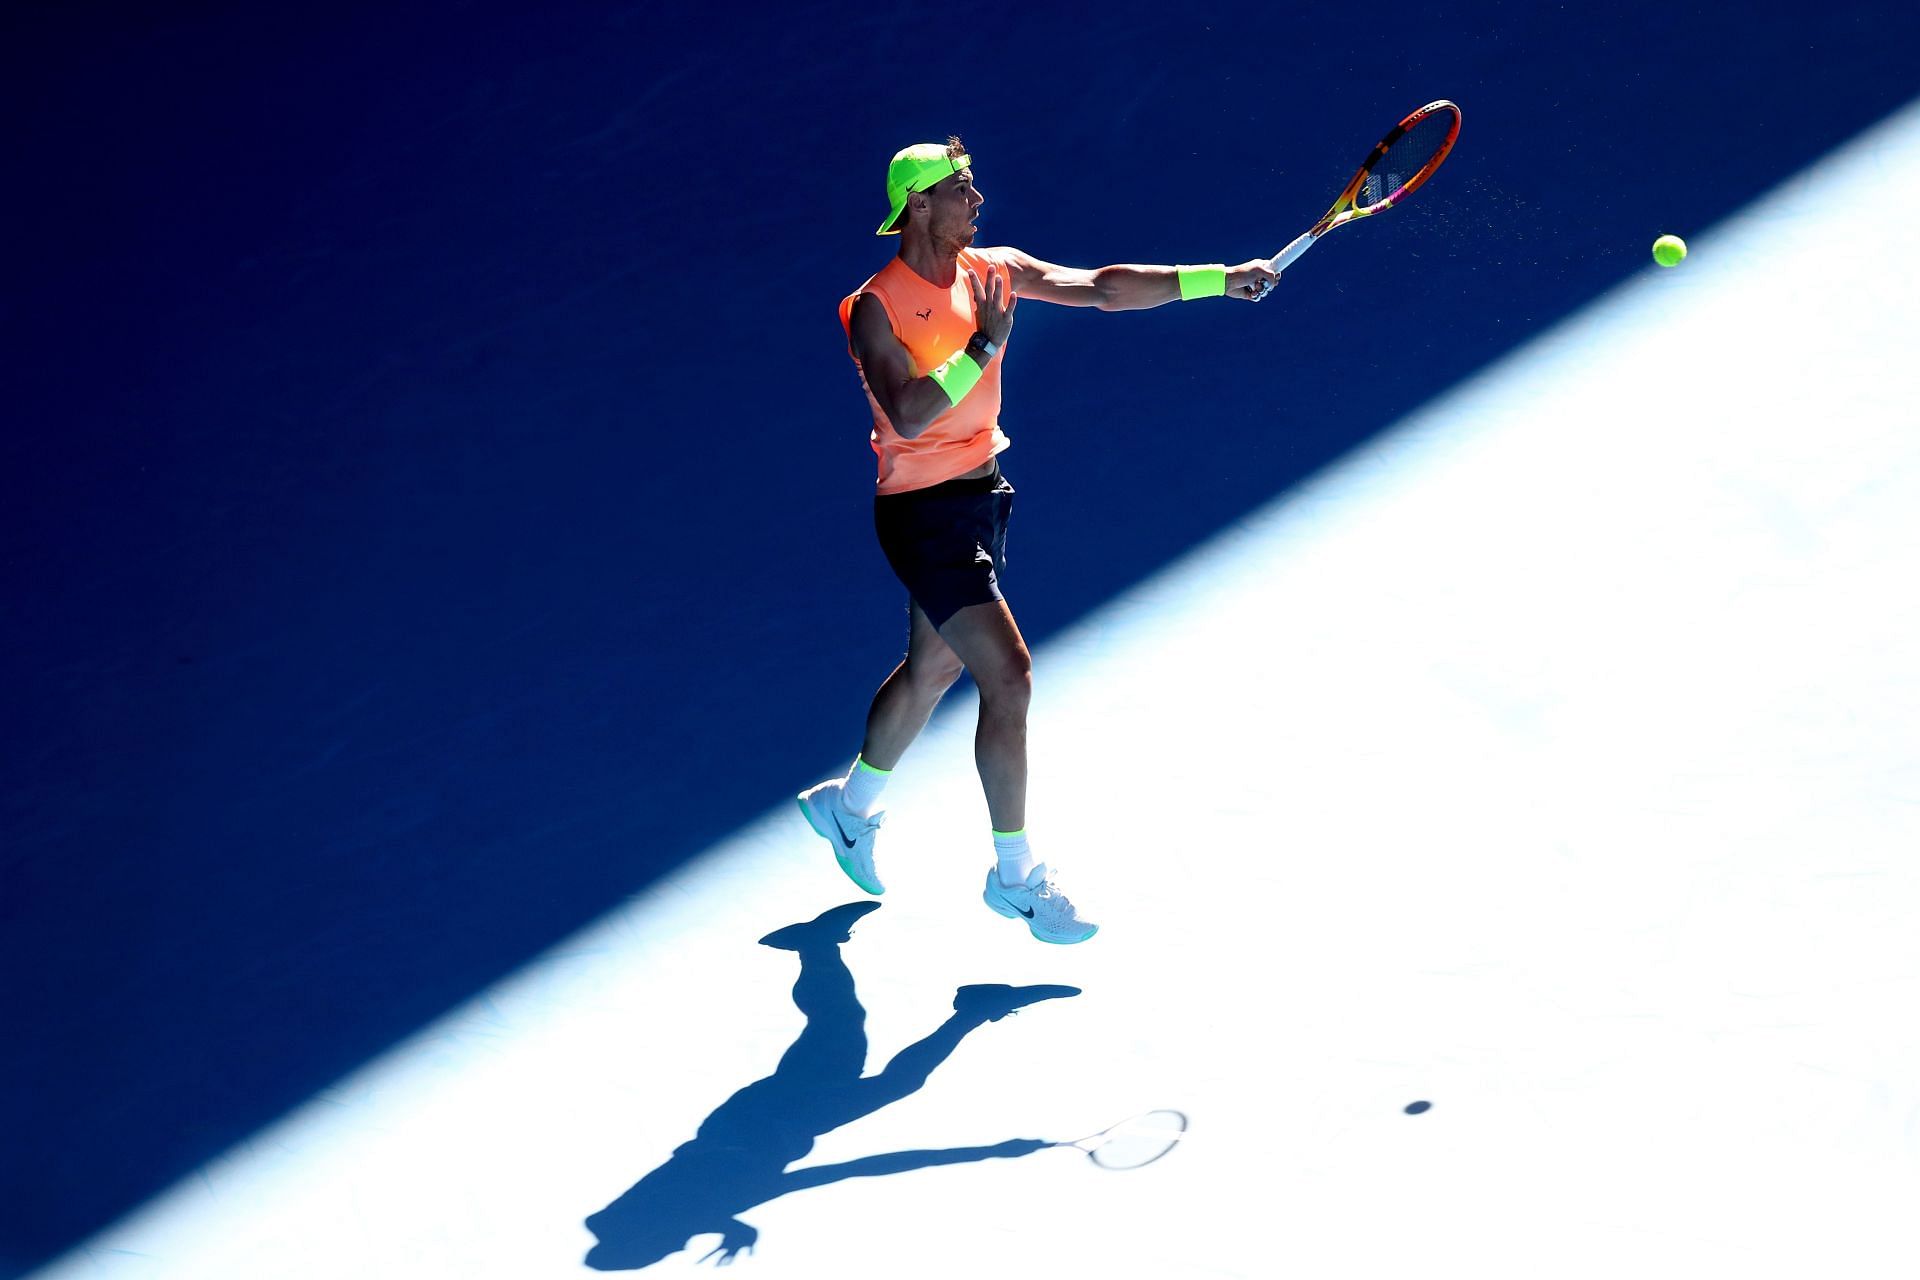 Rafael Nadal plays a forehand during a practice session ahead of the 2023 Australian Open